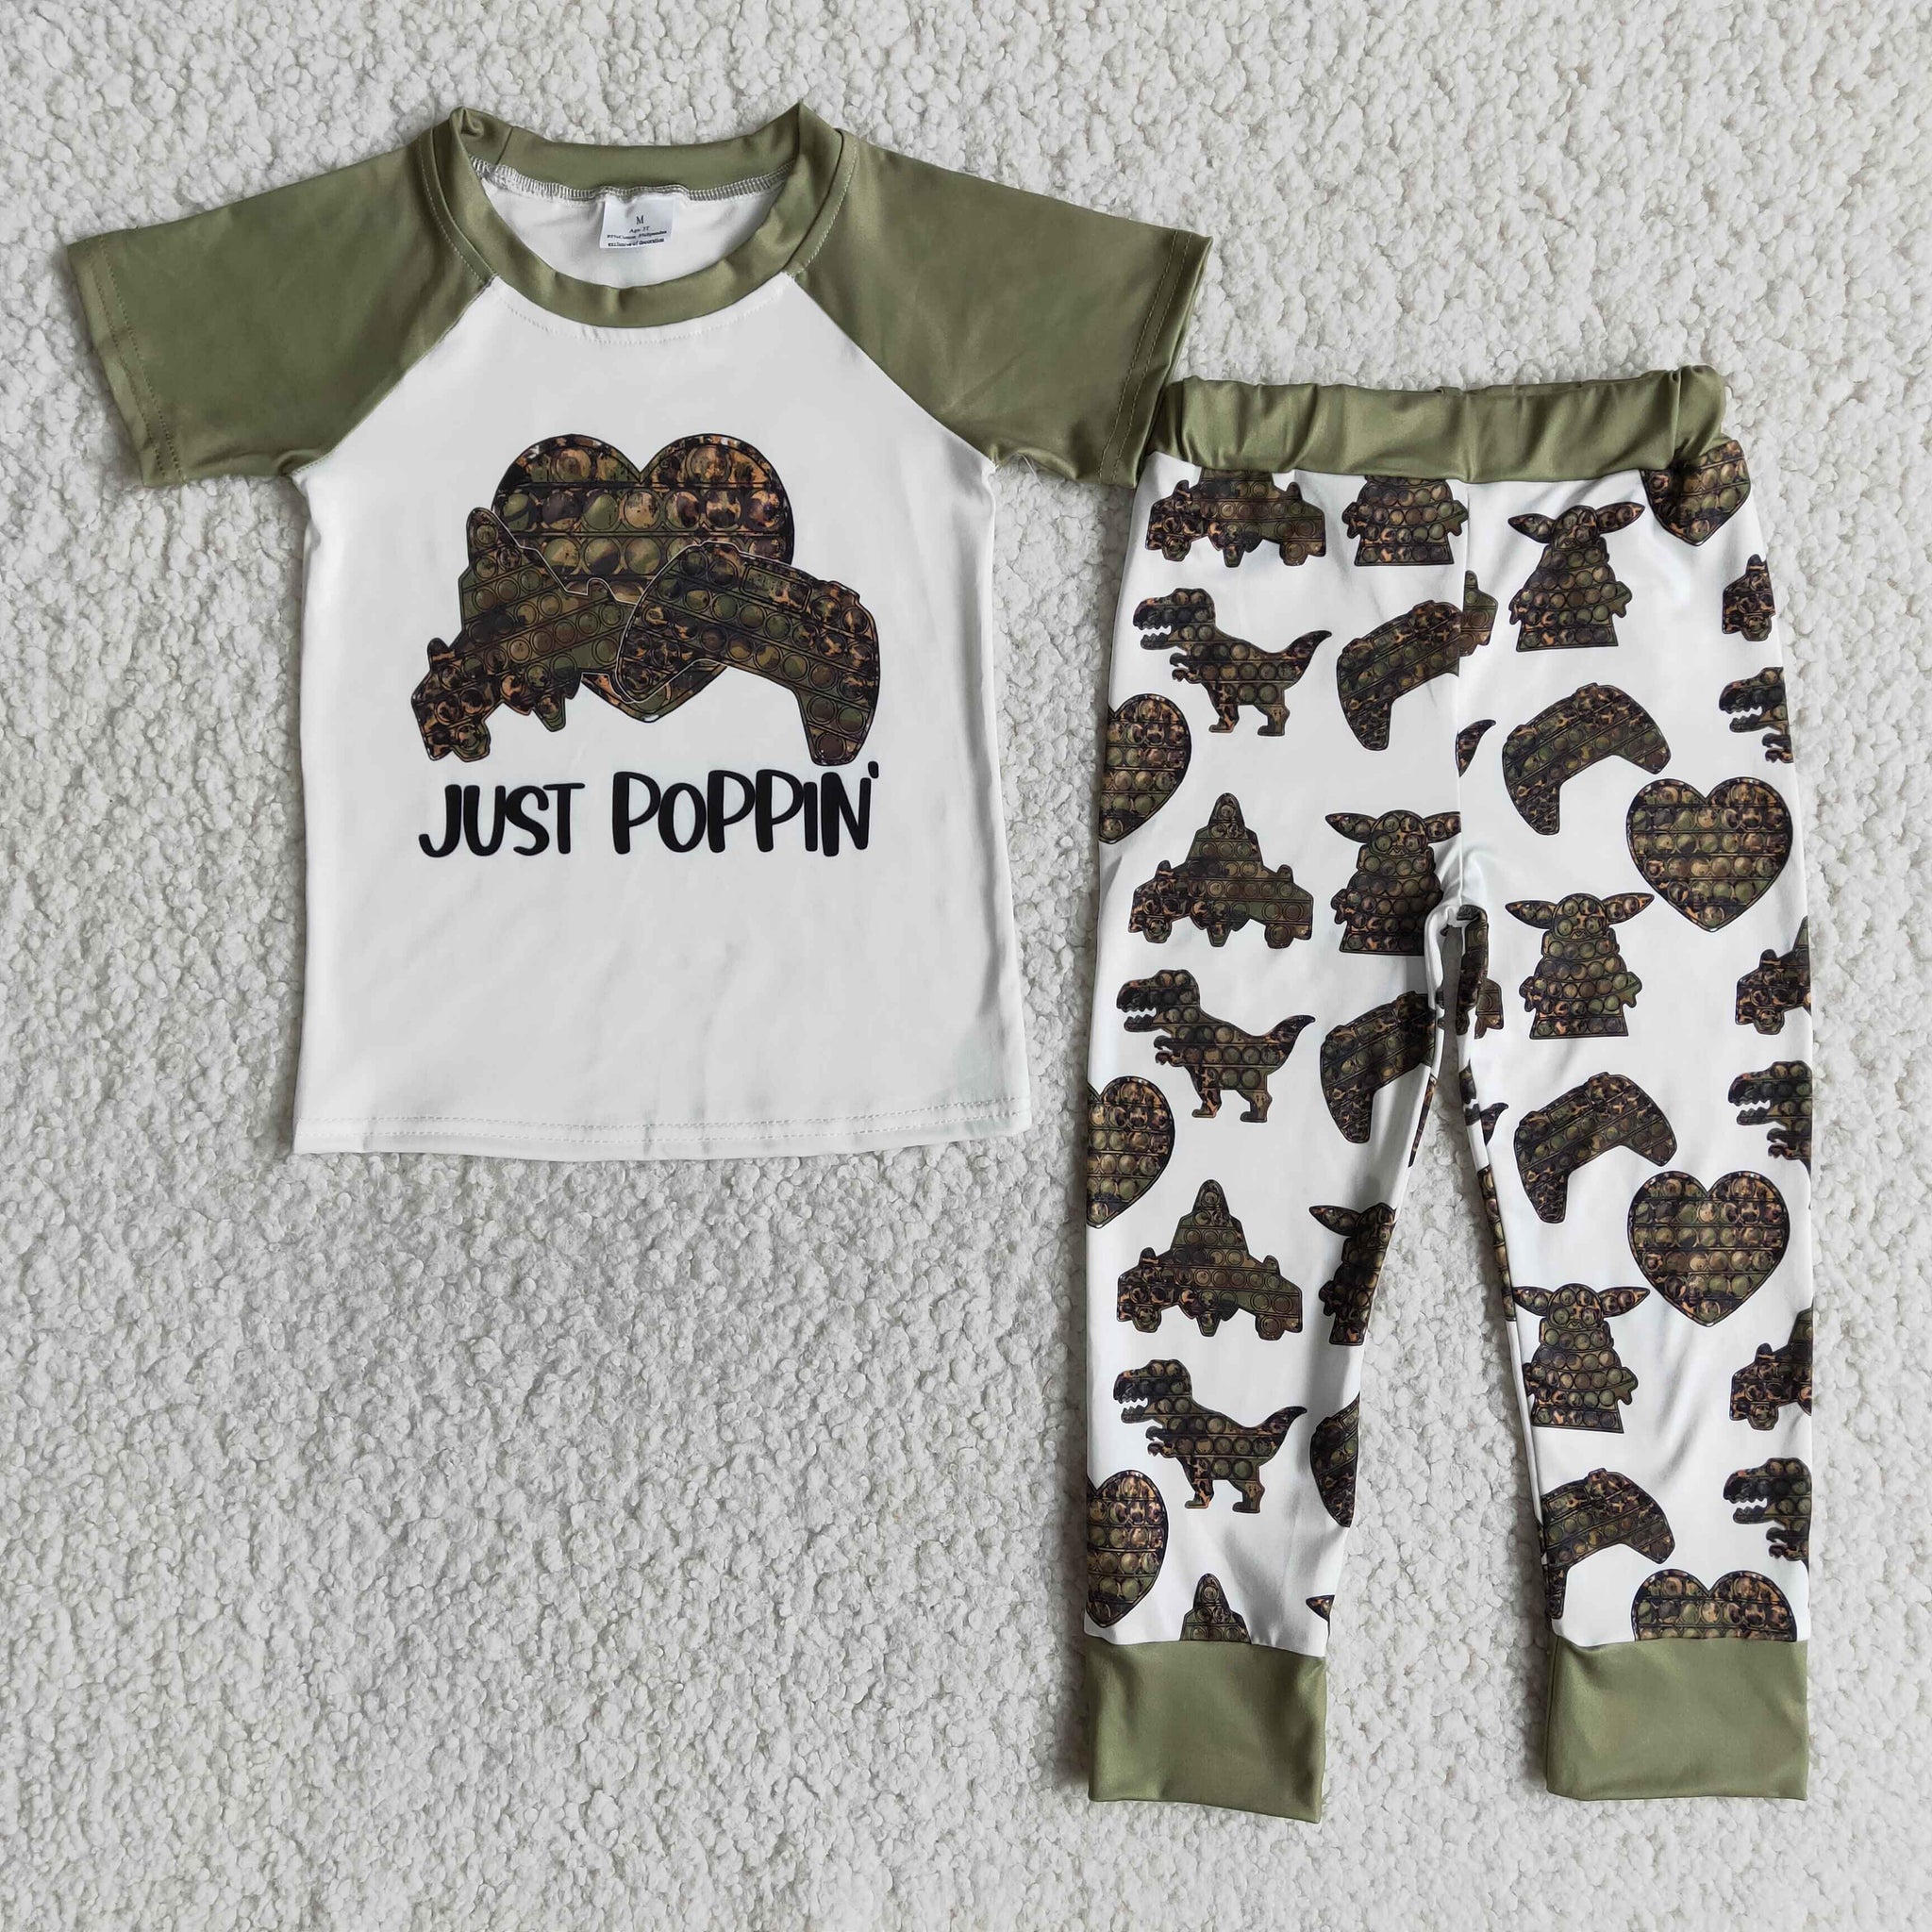 E12-16 baby boy clothes just poppin fall spring boy pants set-promotion 6.1 $5.5